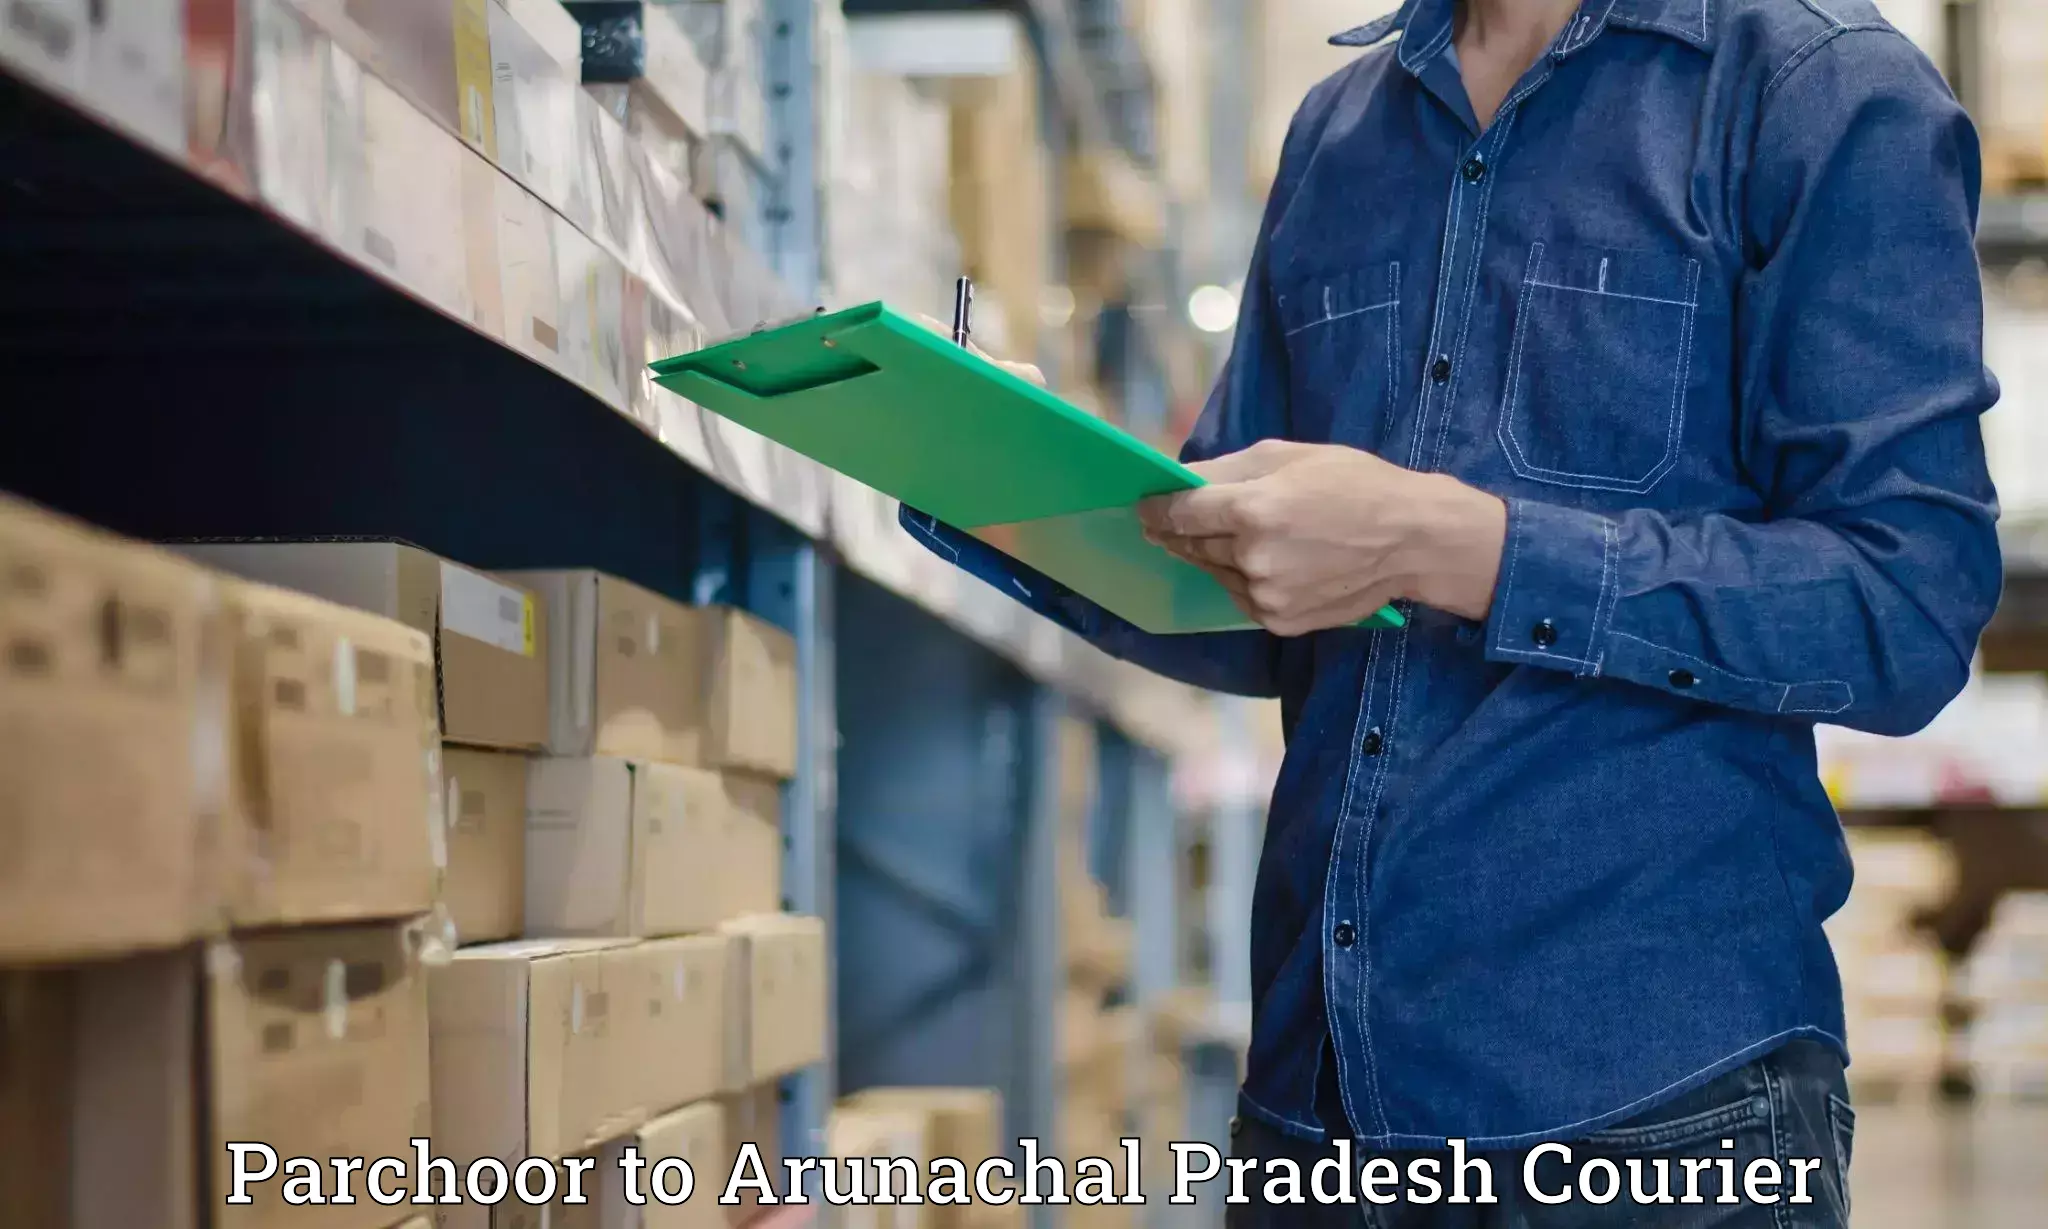 State-of-the-art courier technology Parchoor to Arunachal Pradesh